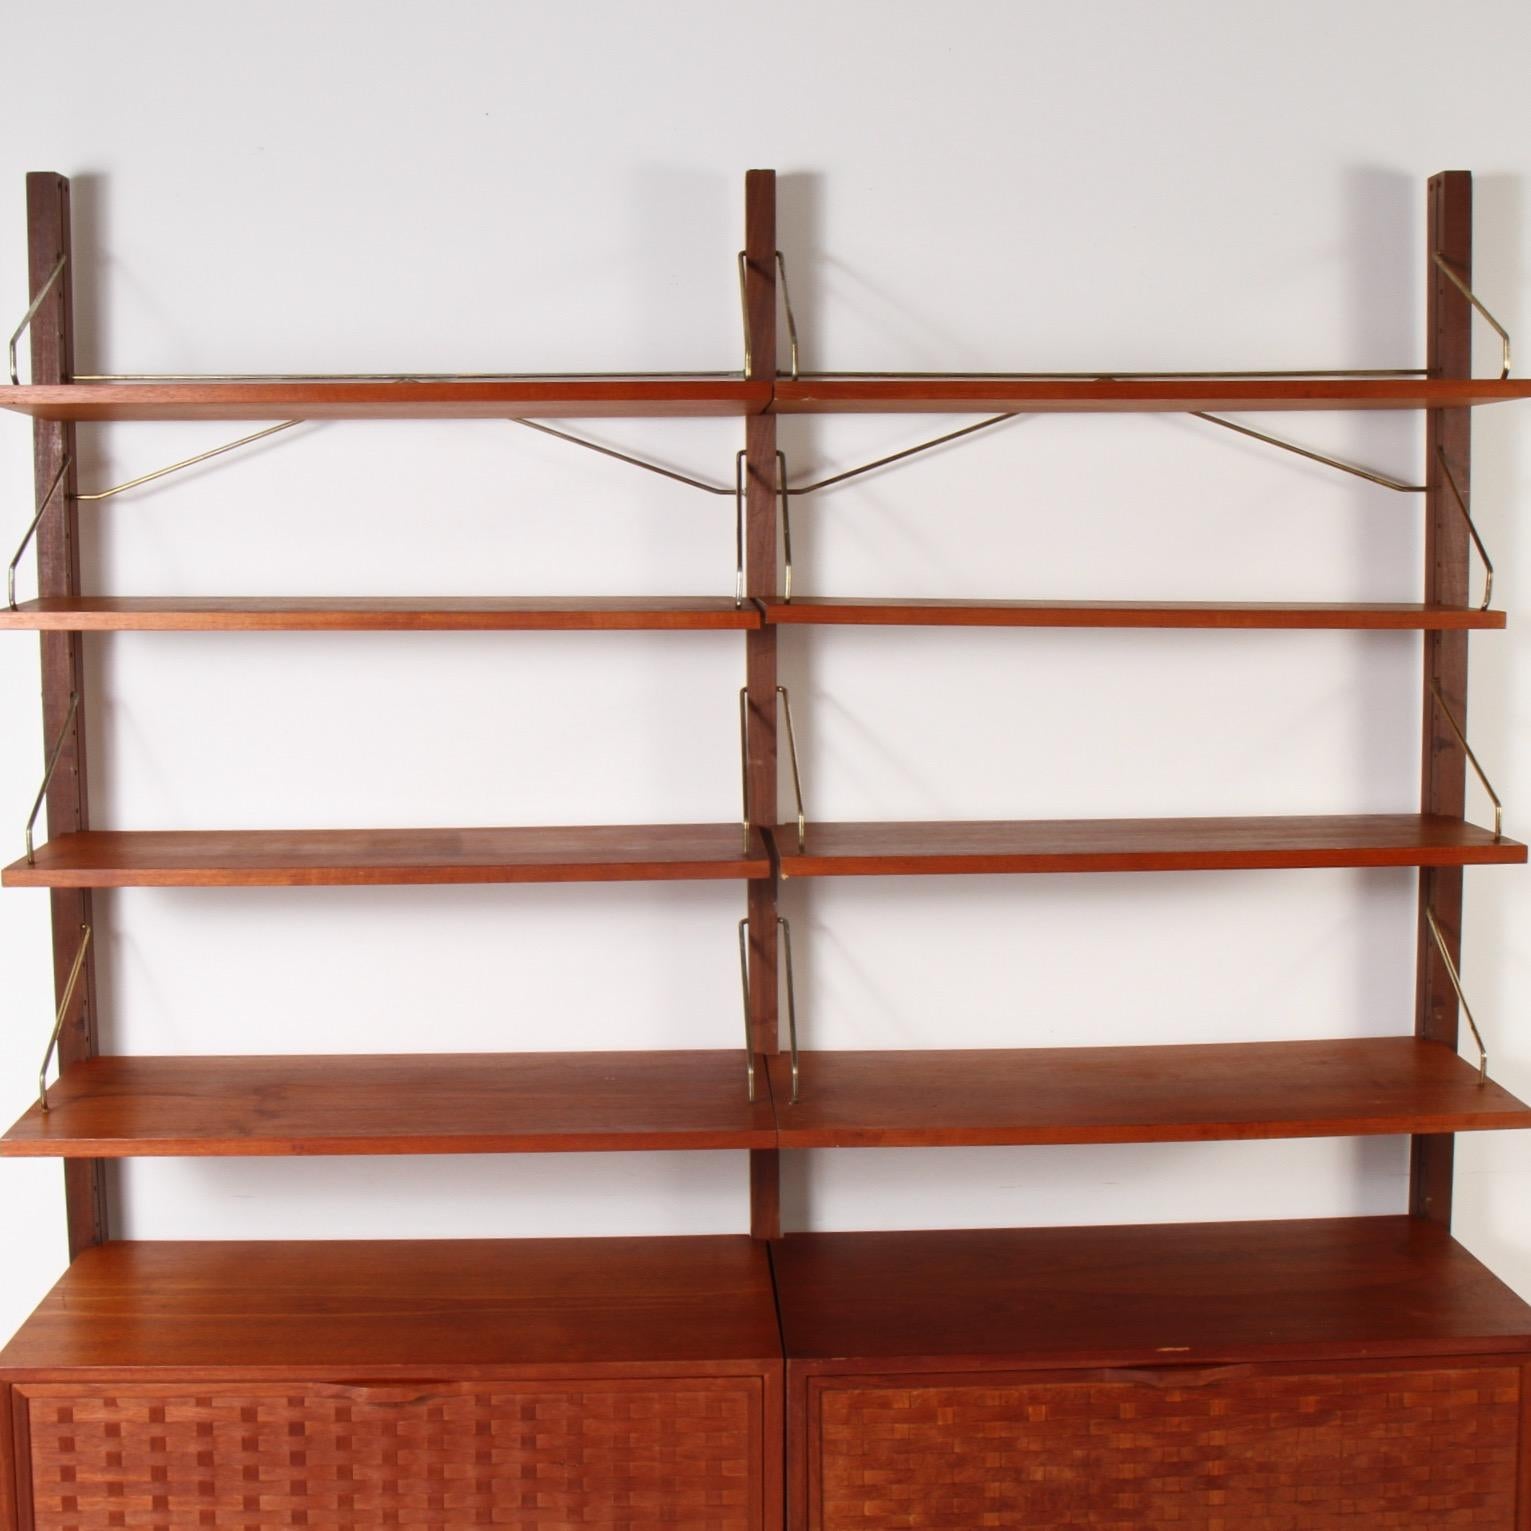 Two column teak Cado wall system that features 8 adjustable teak shelves and two drop down basket-weave cabinets.